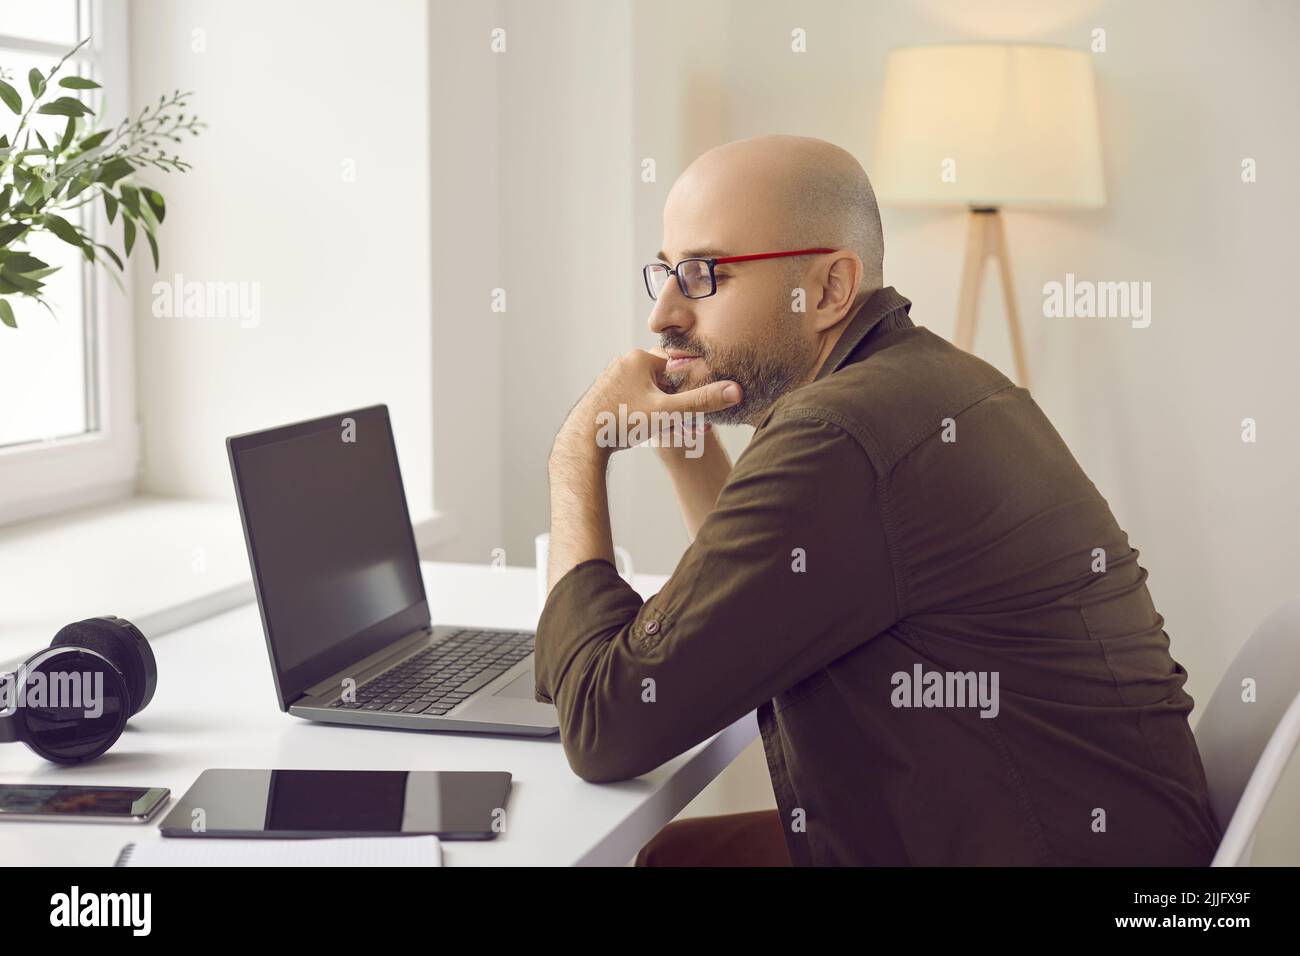 Pensive man sitting at his working desk with laptop, tablet, mobile phone and headphones Stock Photo